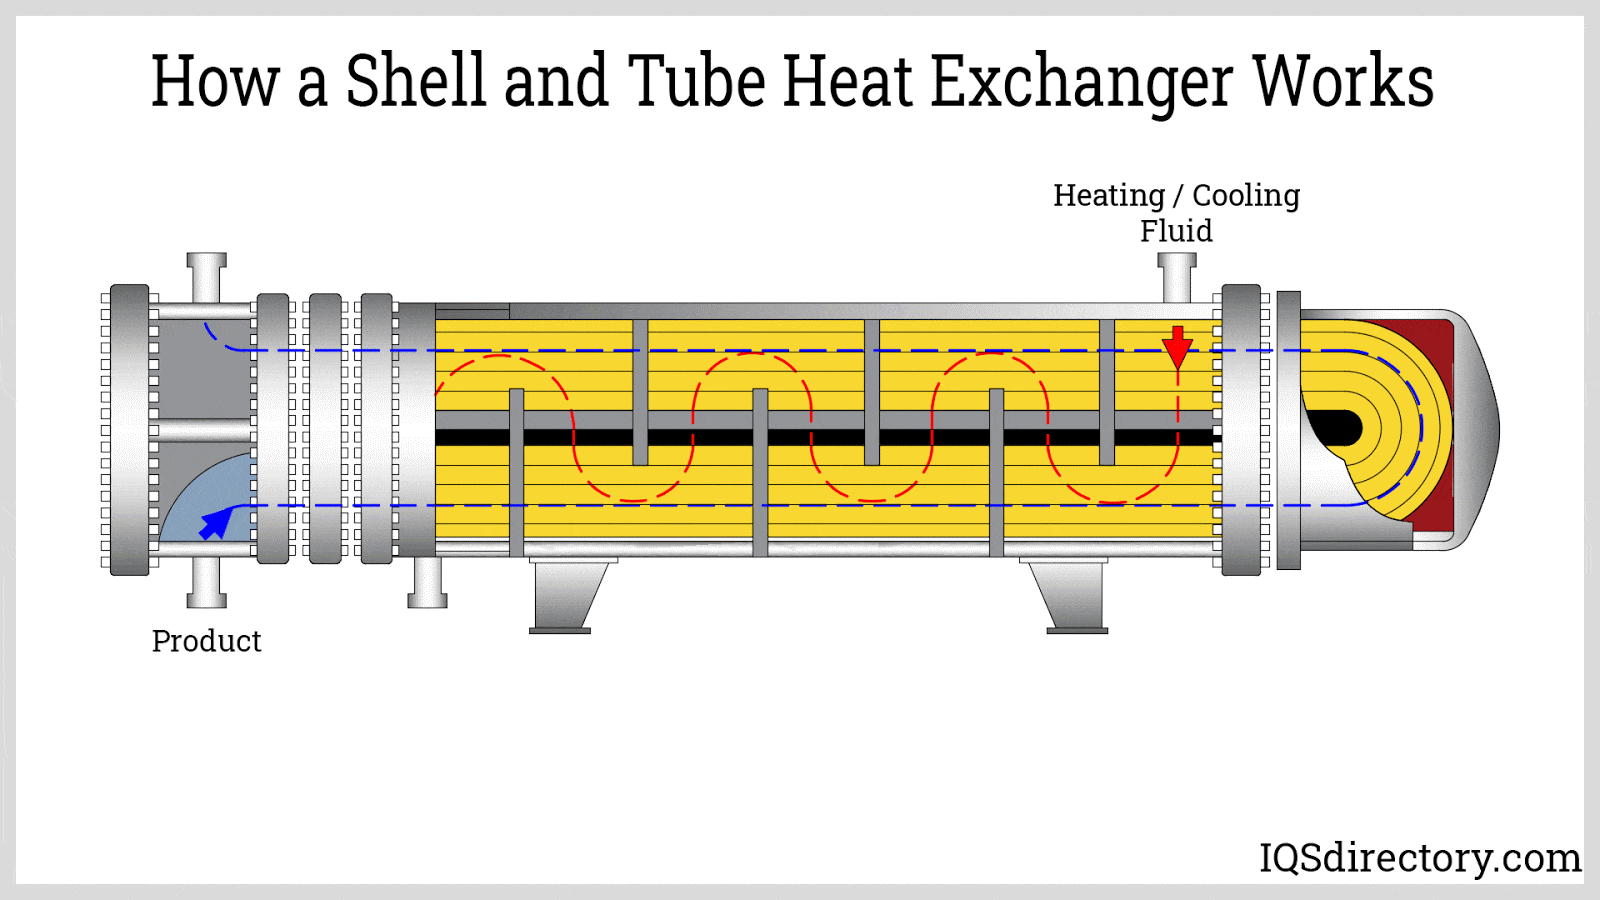 How a Shell and Tube Heat Exchanger Works